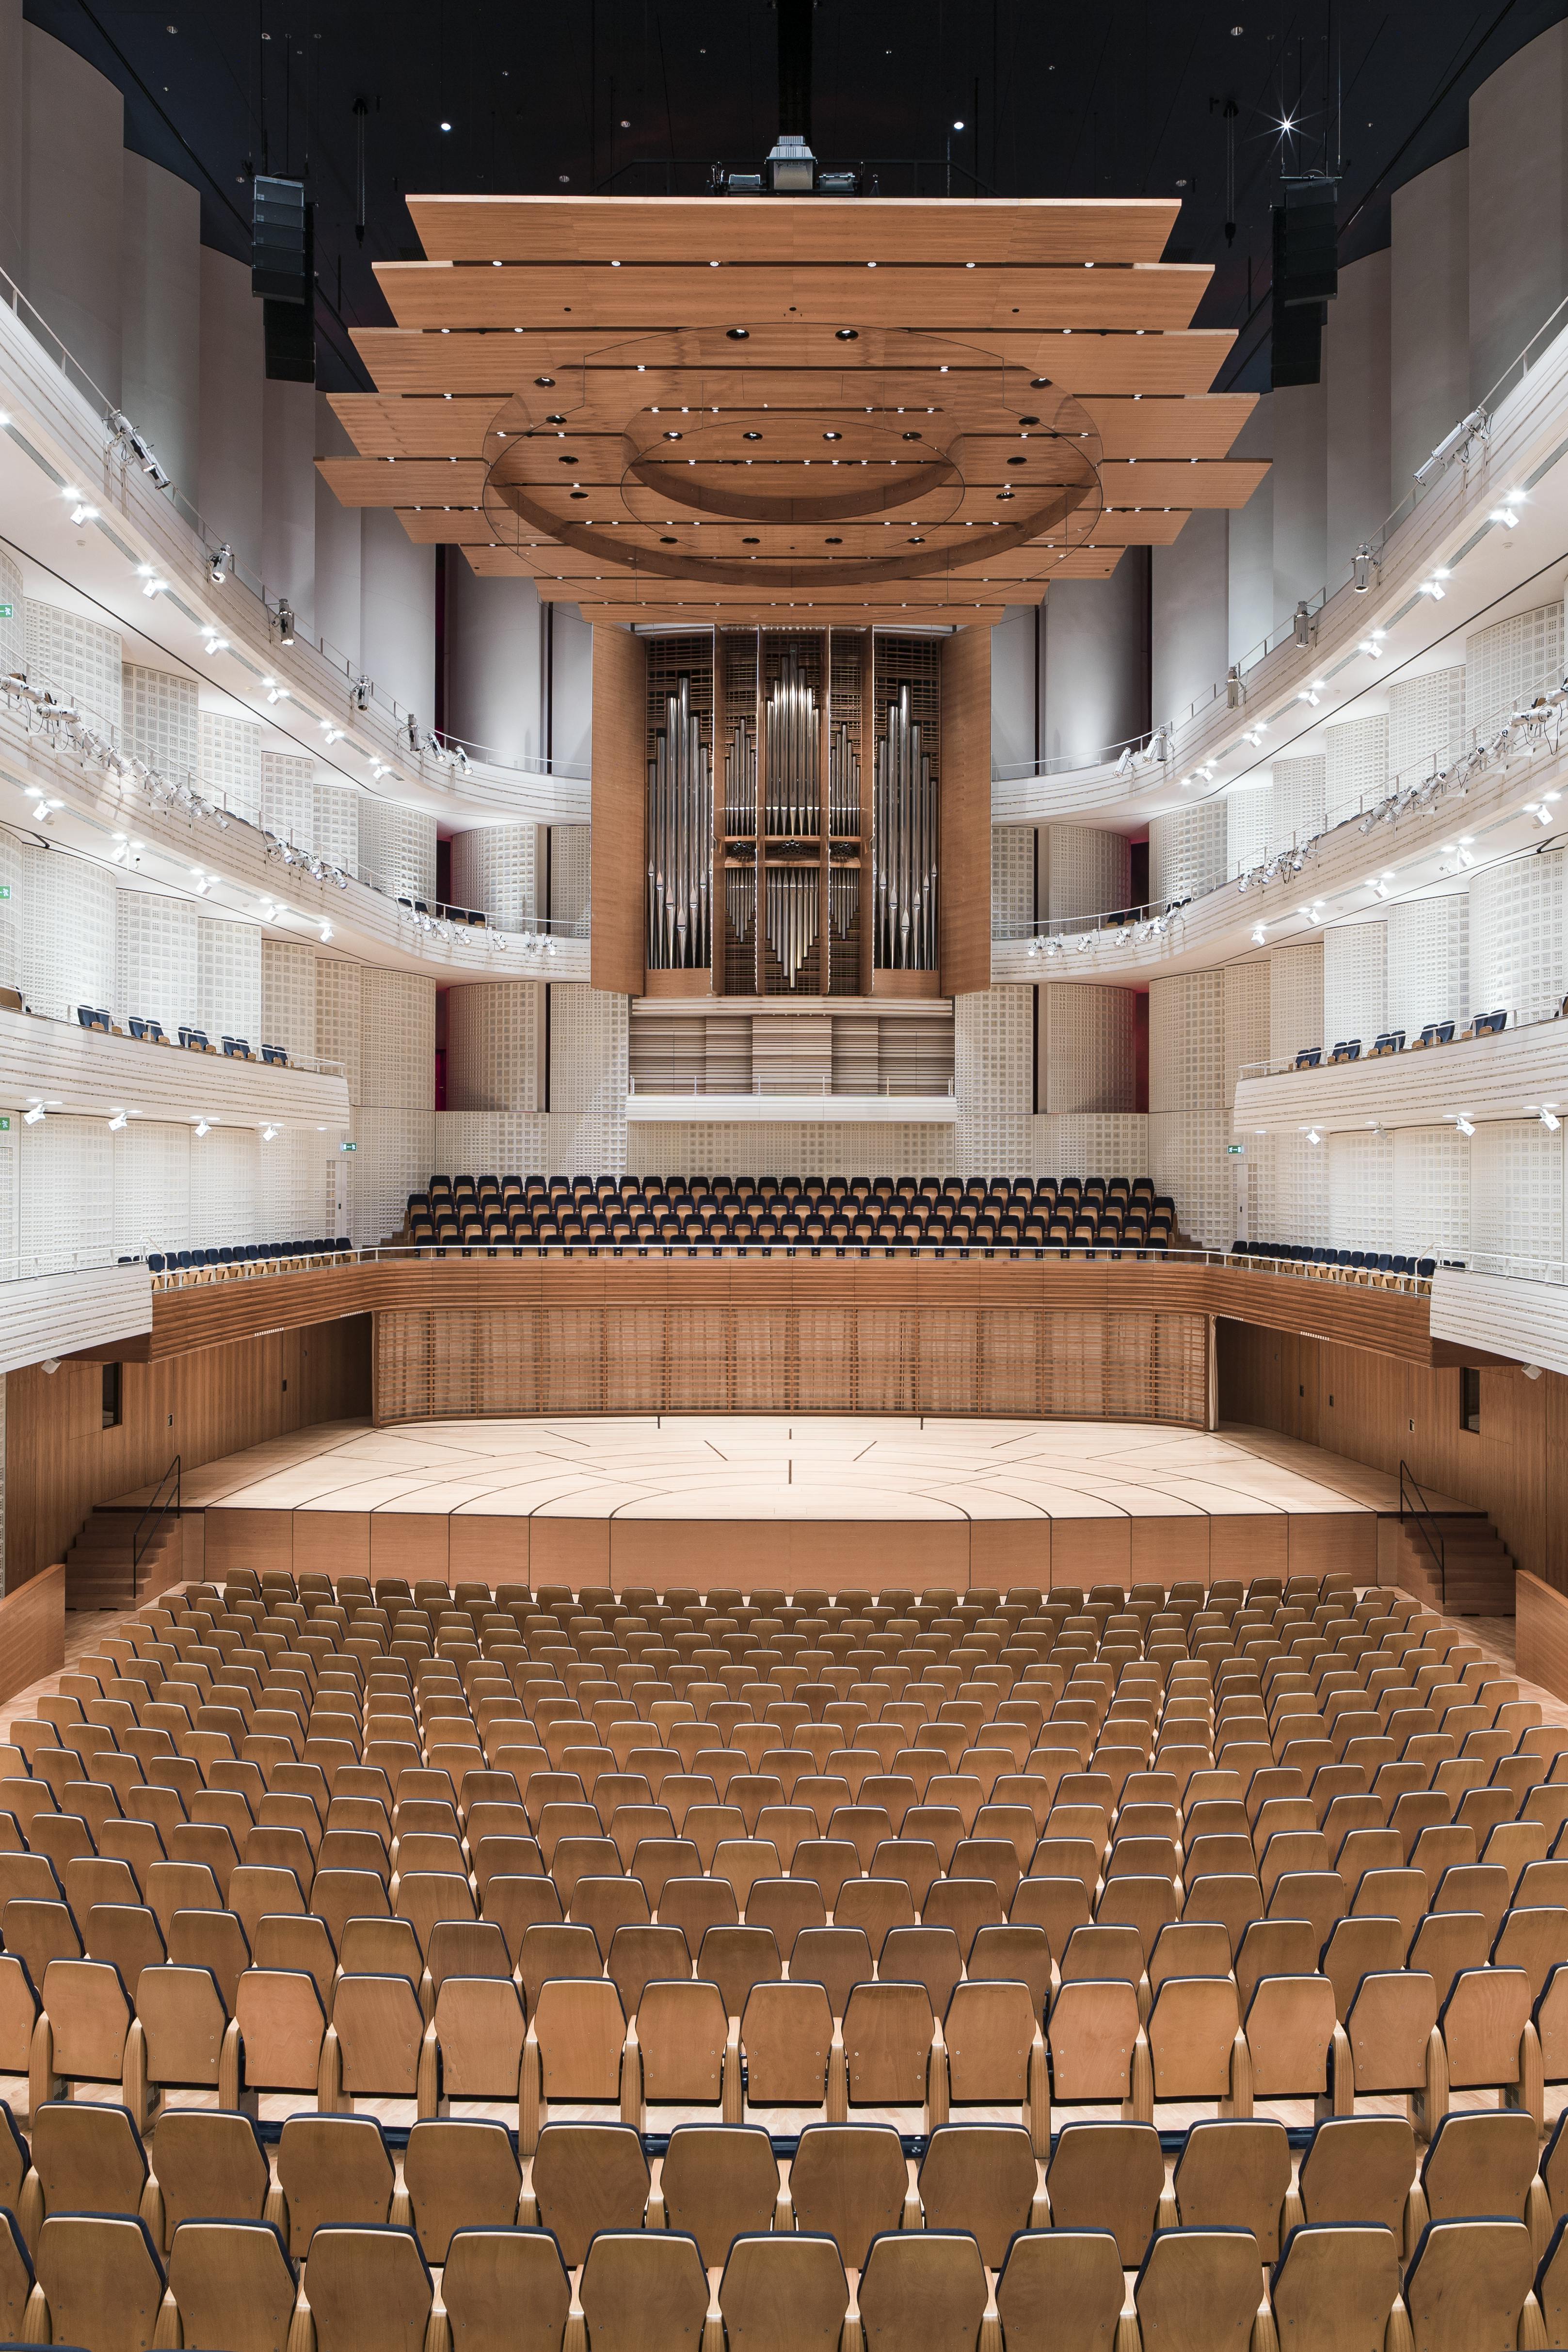 The Concert Hall in the KKL Luzern offers space for up to 1989 Guests